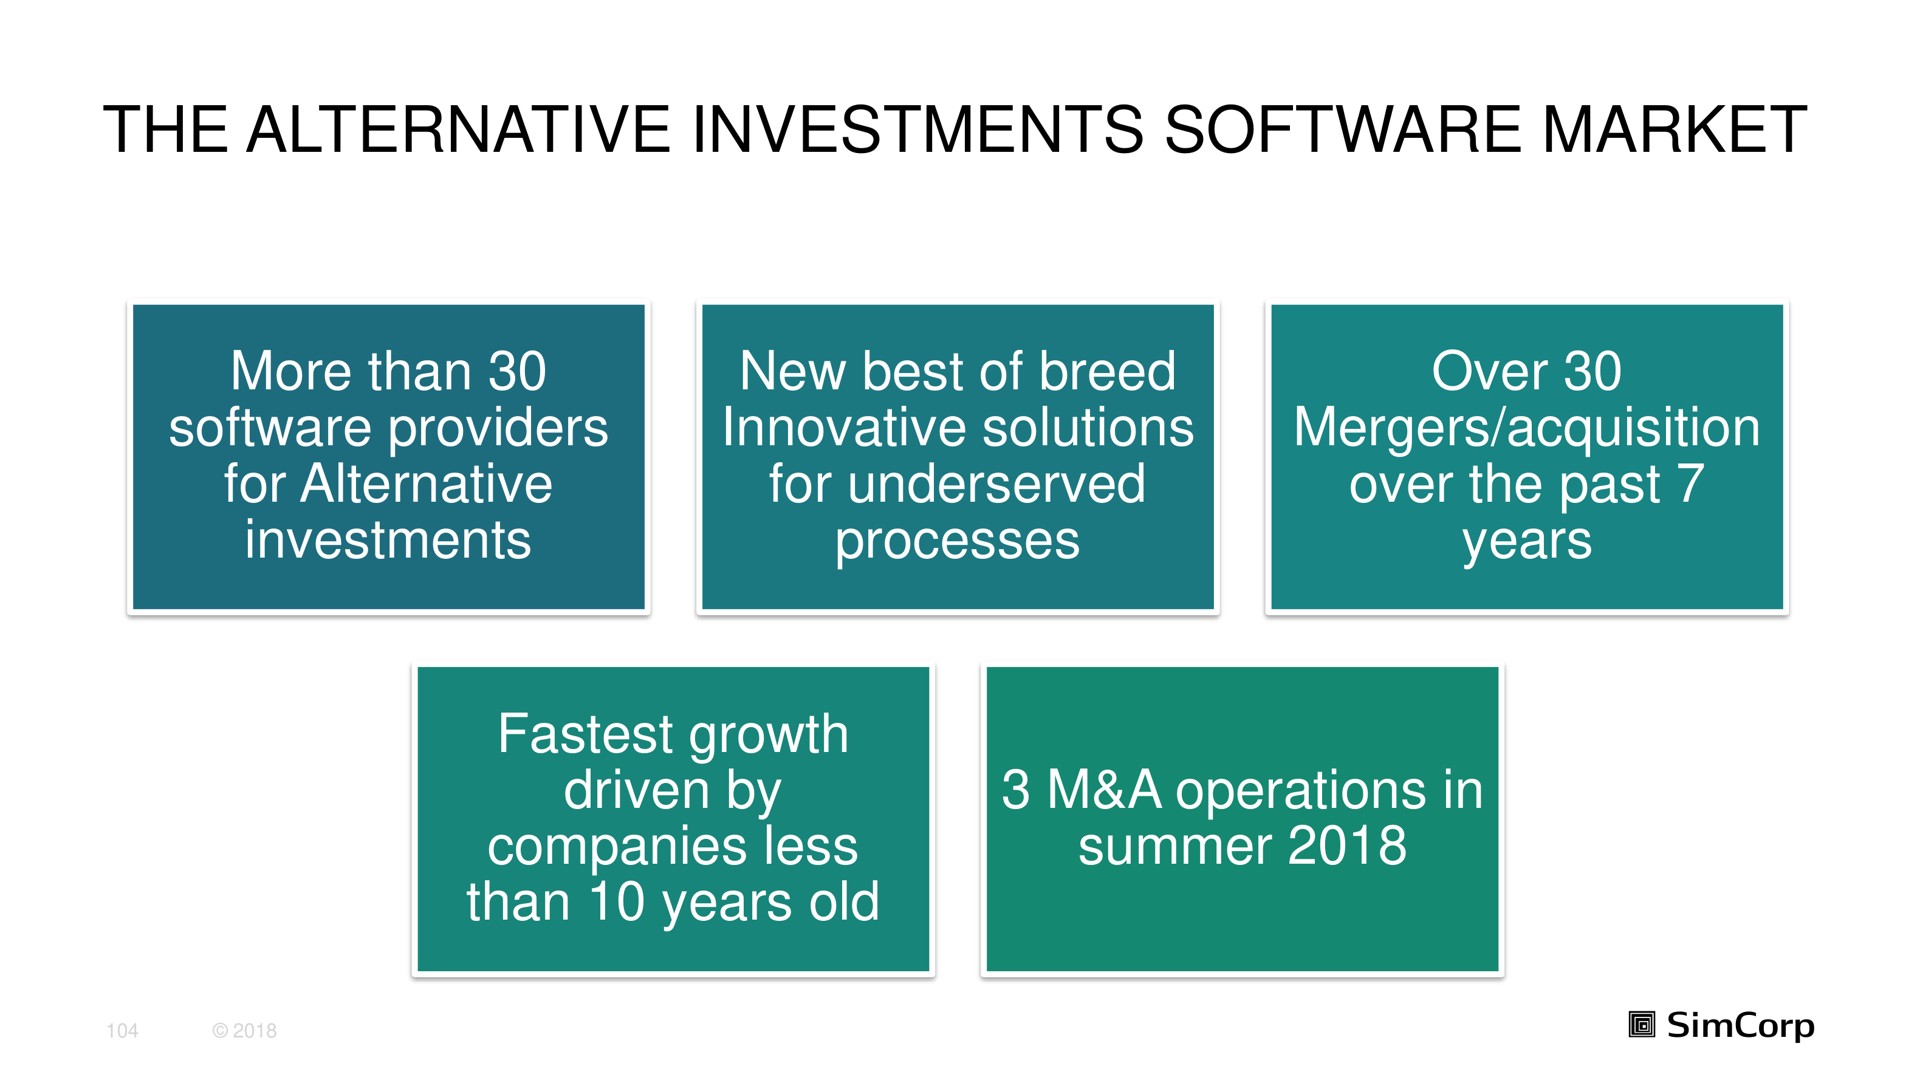 the alternative investments market more than providers for alternative investments new best of breed innovative solutions for processes over mergers acquisition over the past years growth driven by companies less than years old a operations in summer | SimCorp